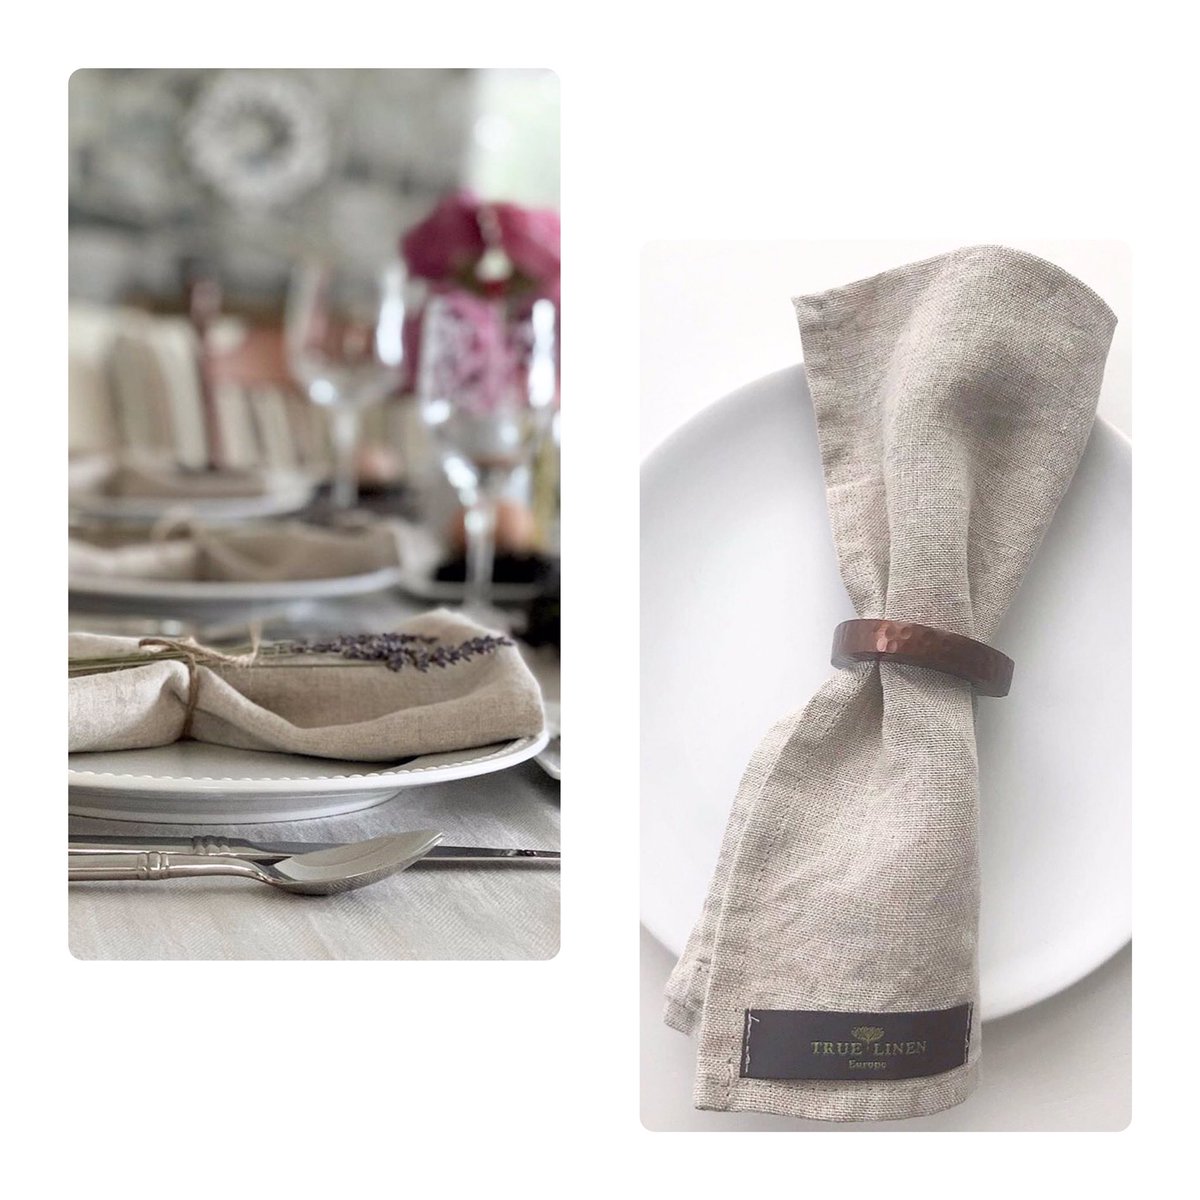 Whether you'll go for Sunday roast or a lighter version of your today's lunch, please remember to dress your dining table with Natural #linennapkins to give that cosy, inviting feel. The #clothnapkins always feel better on your hands and face and they are less wasteful than paper